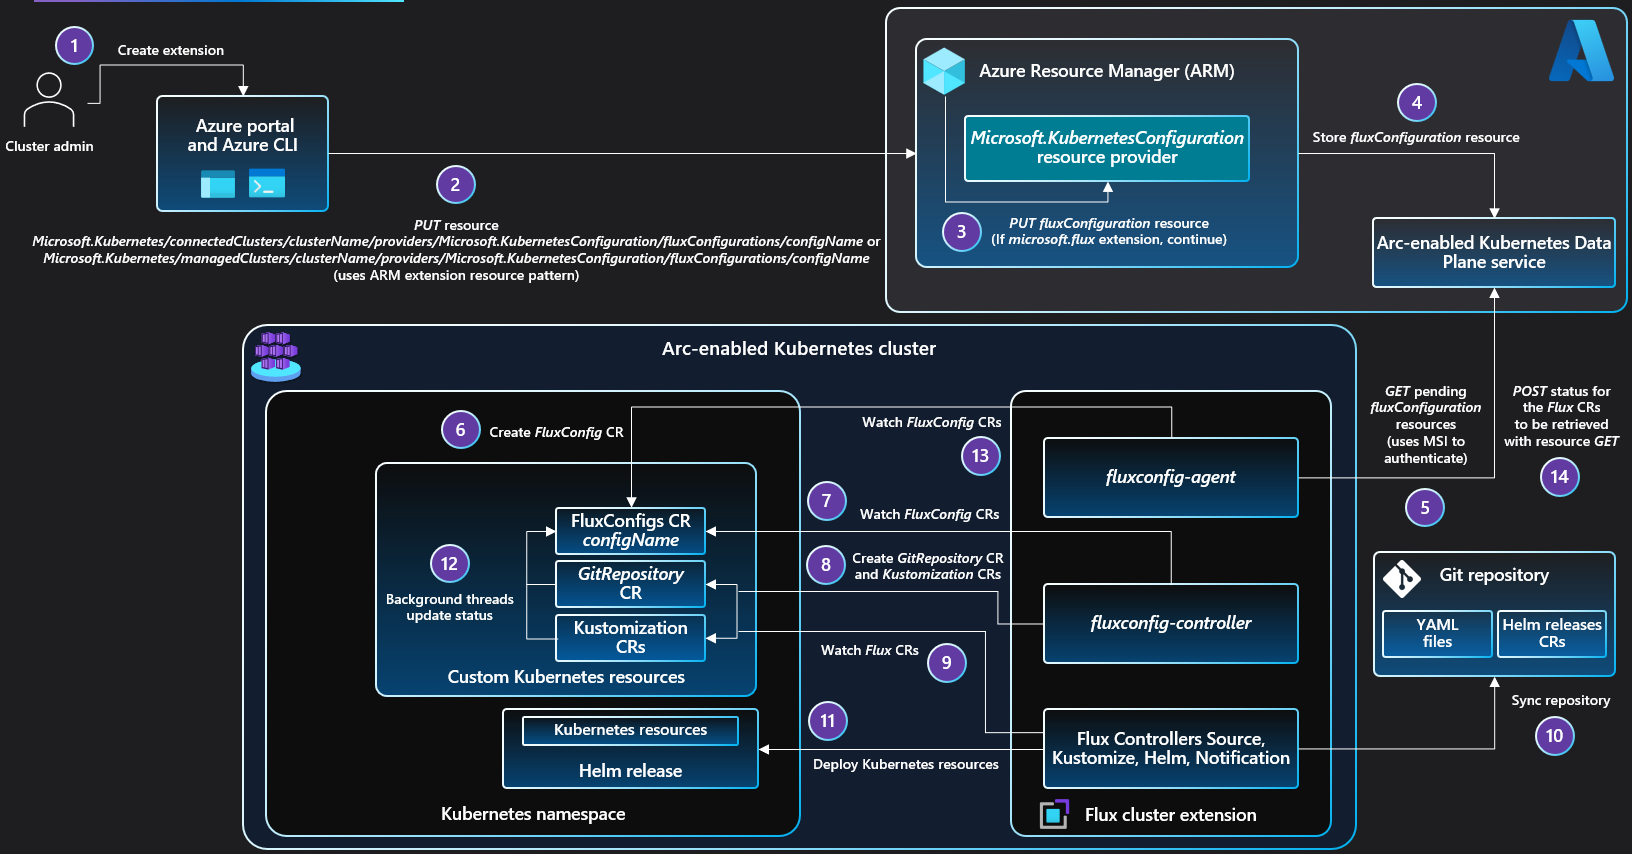 Diagram showing the installation of a Flux configuration in an Azure Arc-enabled Kubernetes or AKS cluster.